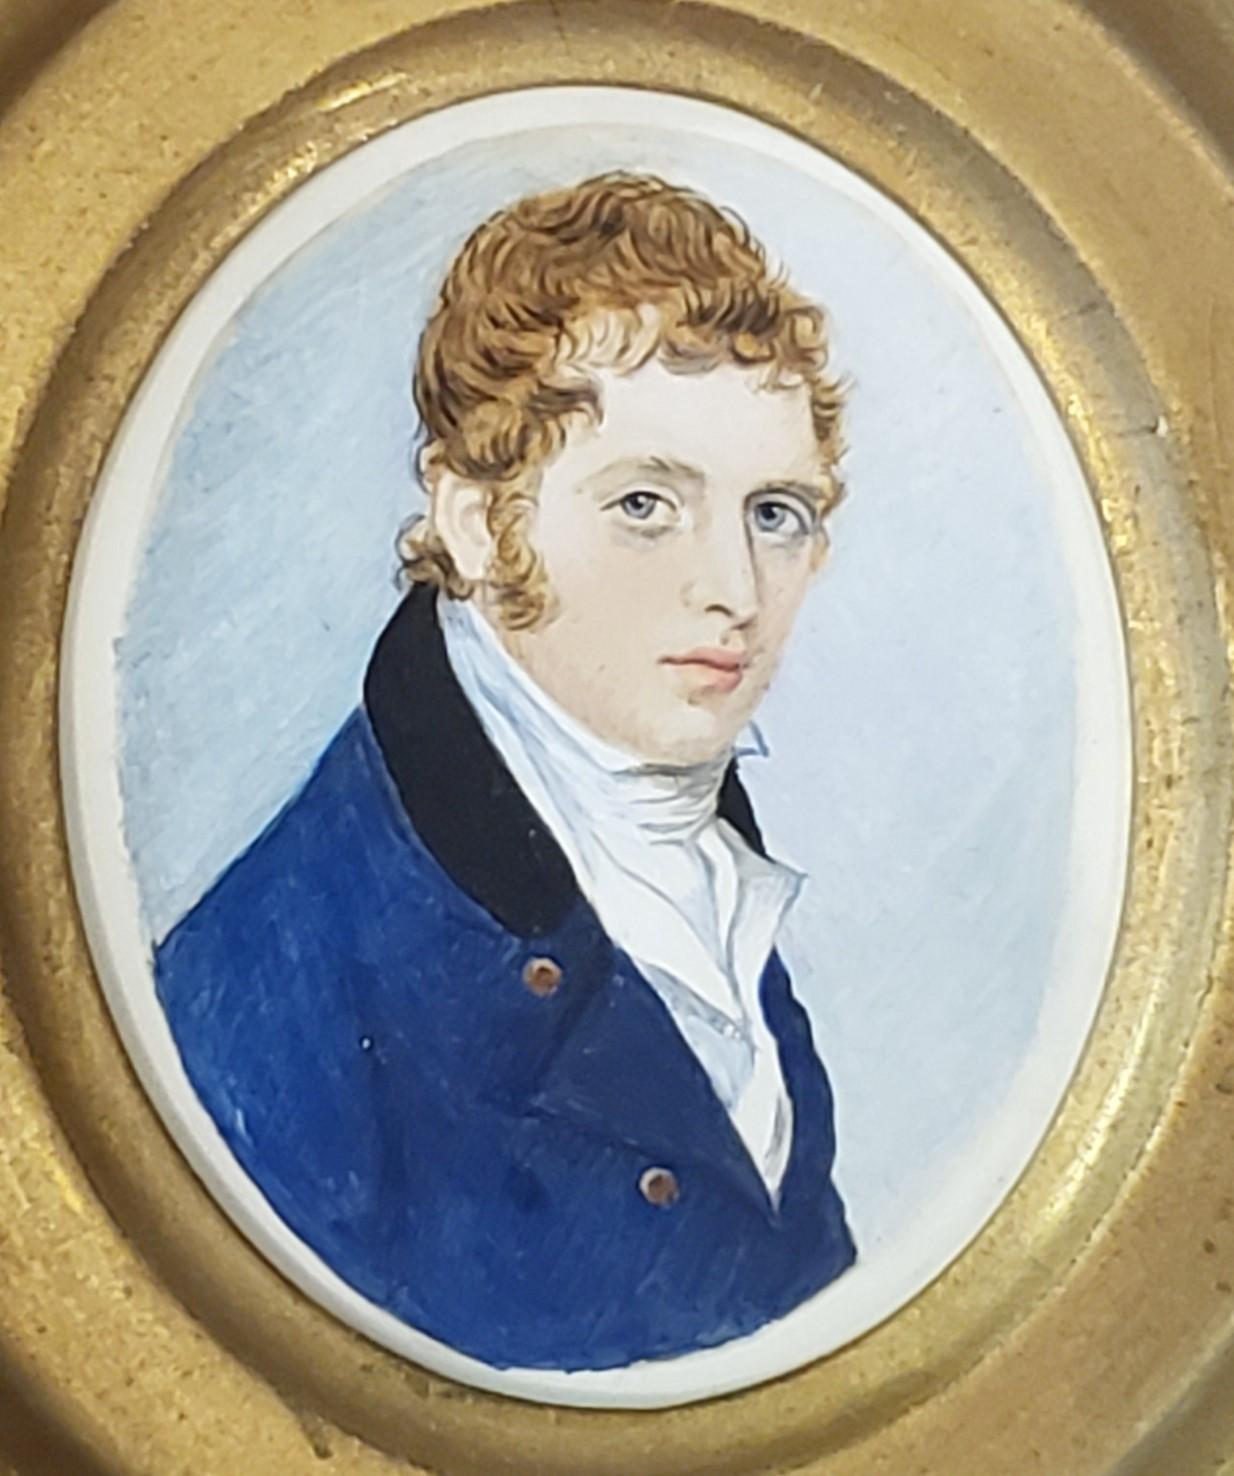 American School Portrait Miniature circa 1840 - Painting by Unknown